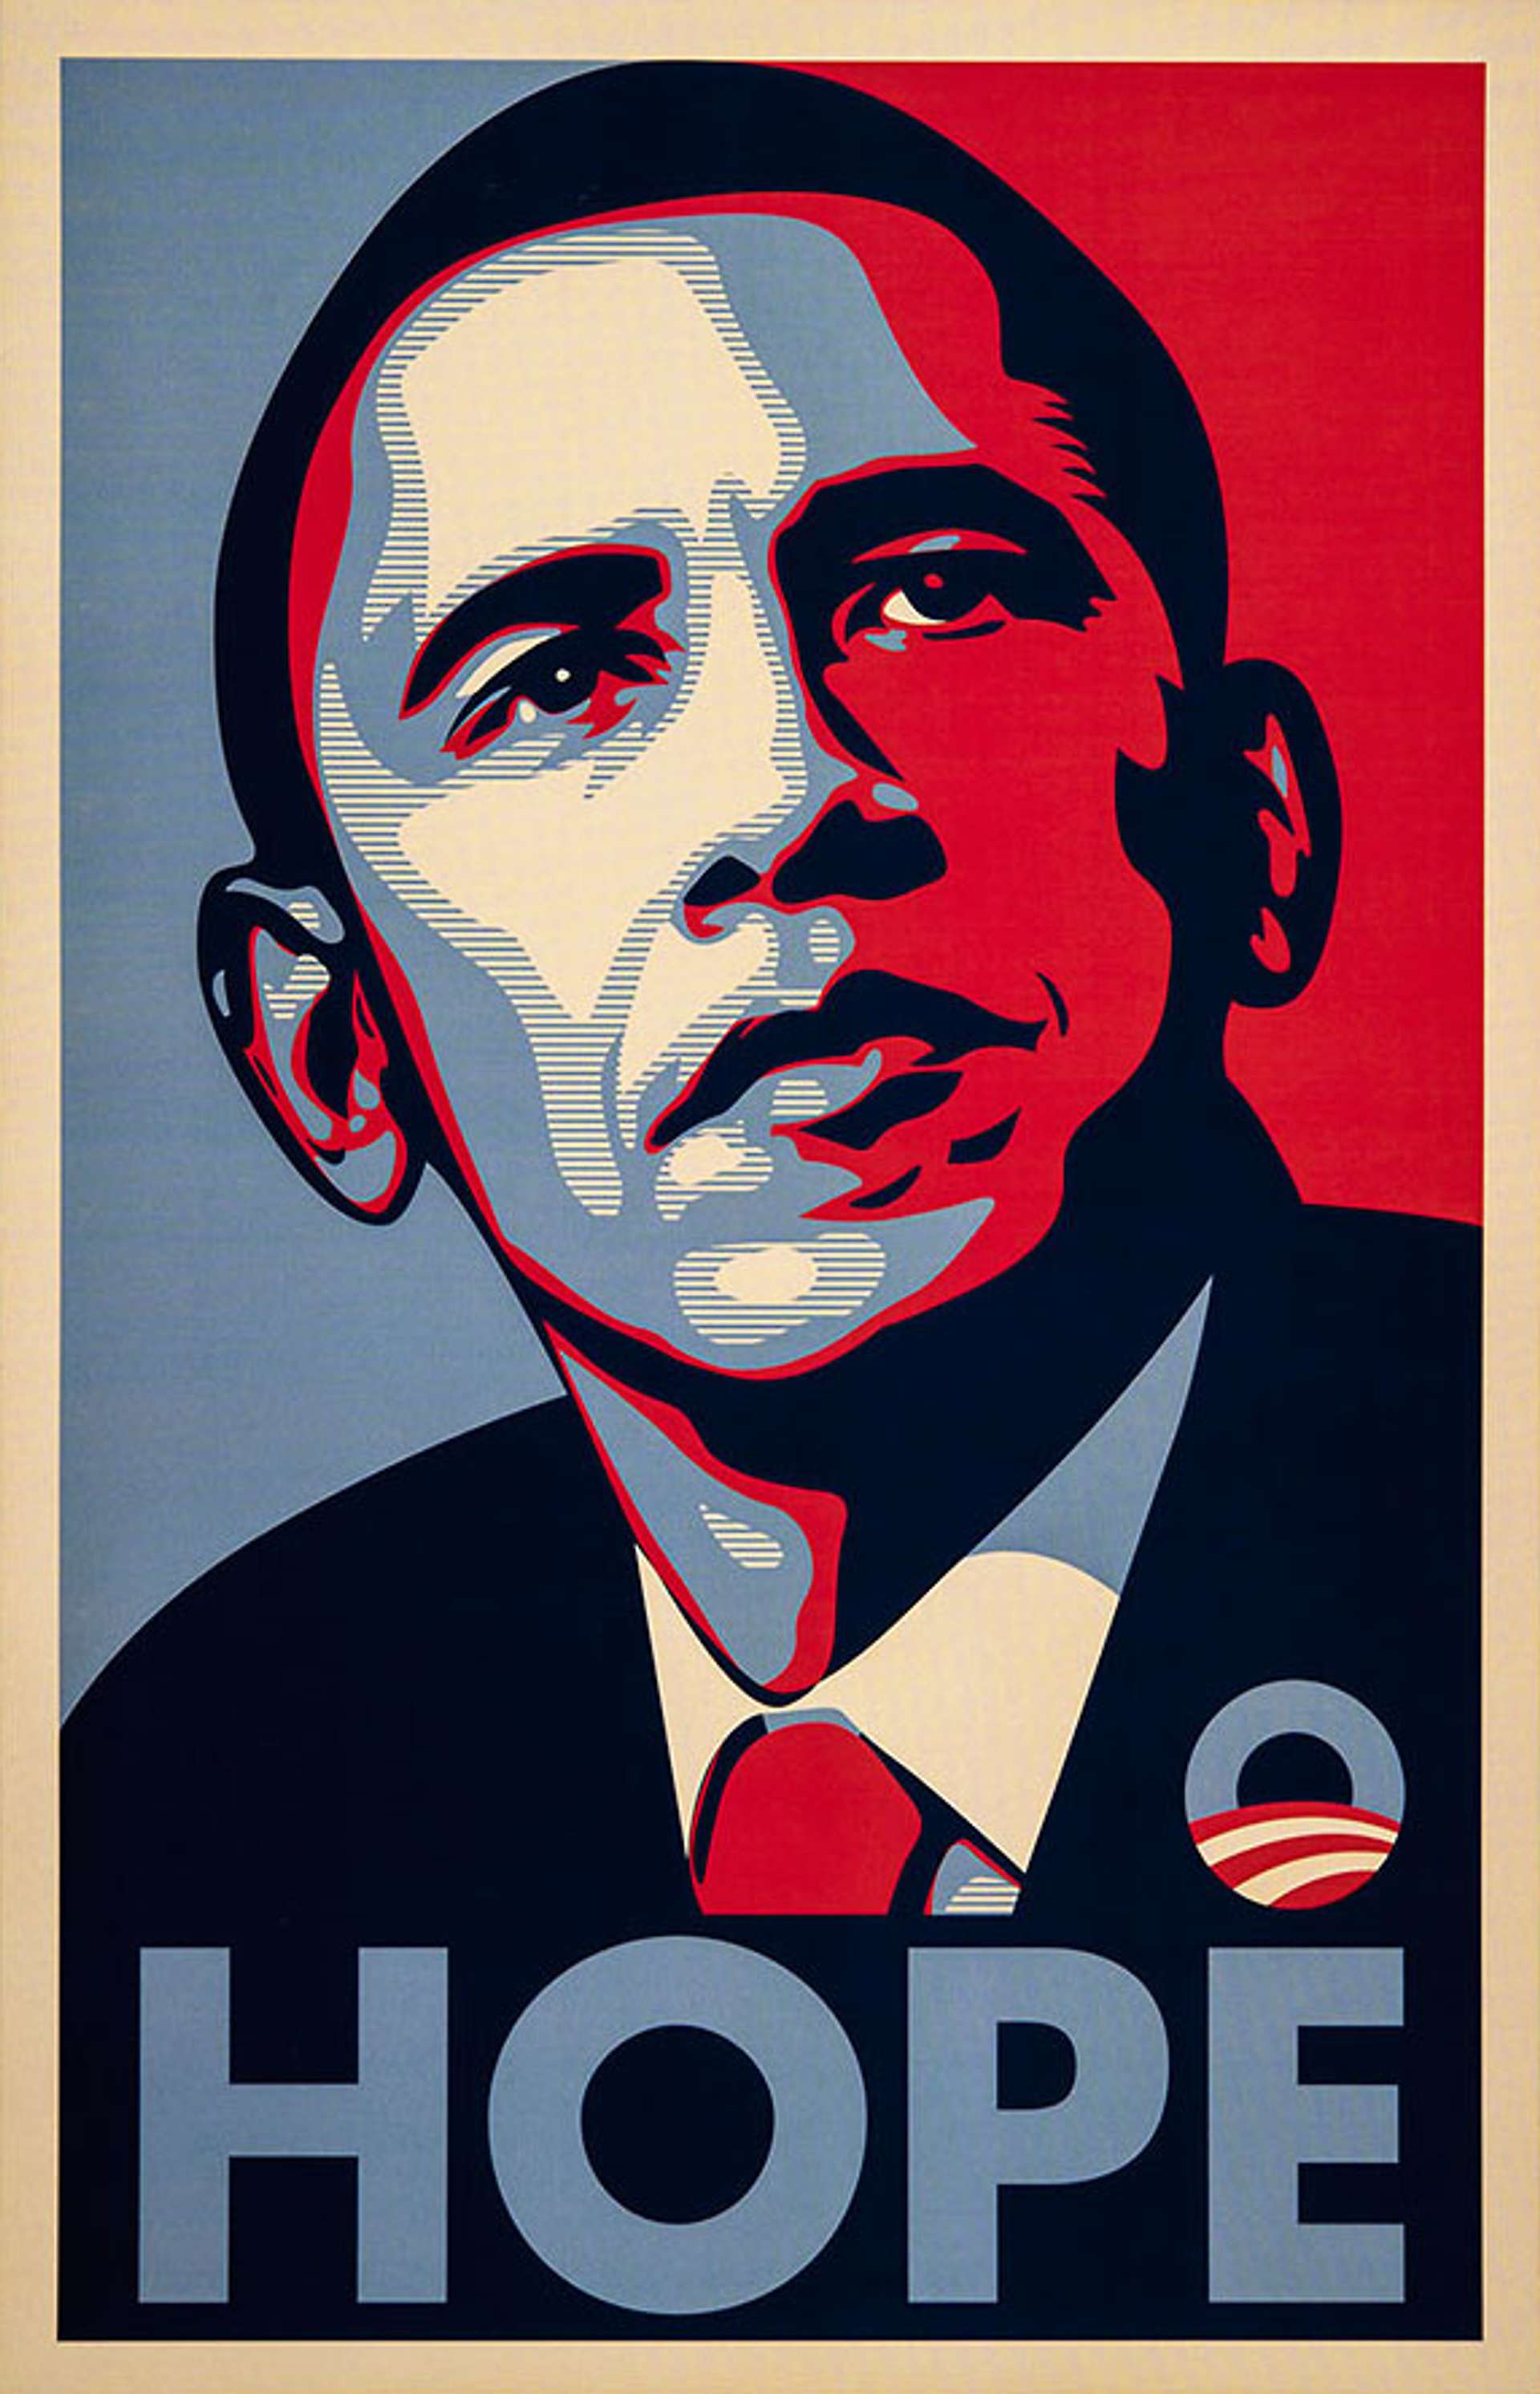 A graphic portrait of Barack Obama in red, white, black and blue with 'hope' written across the bottom in bold capital letters